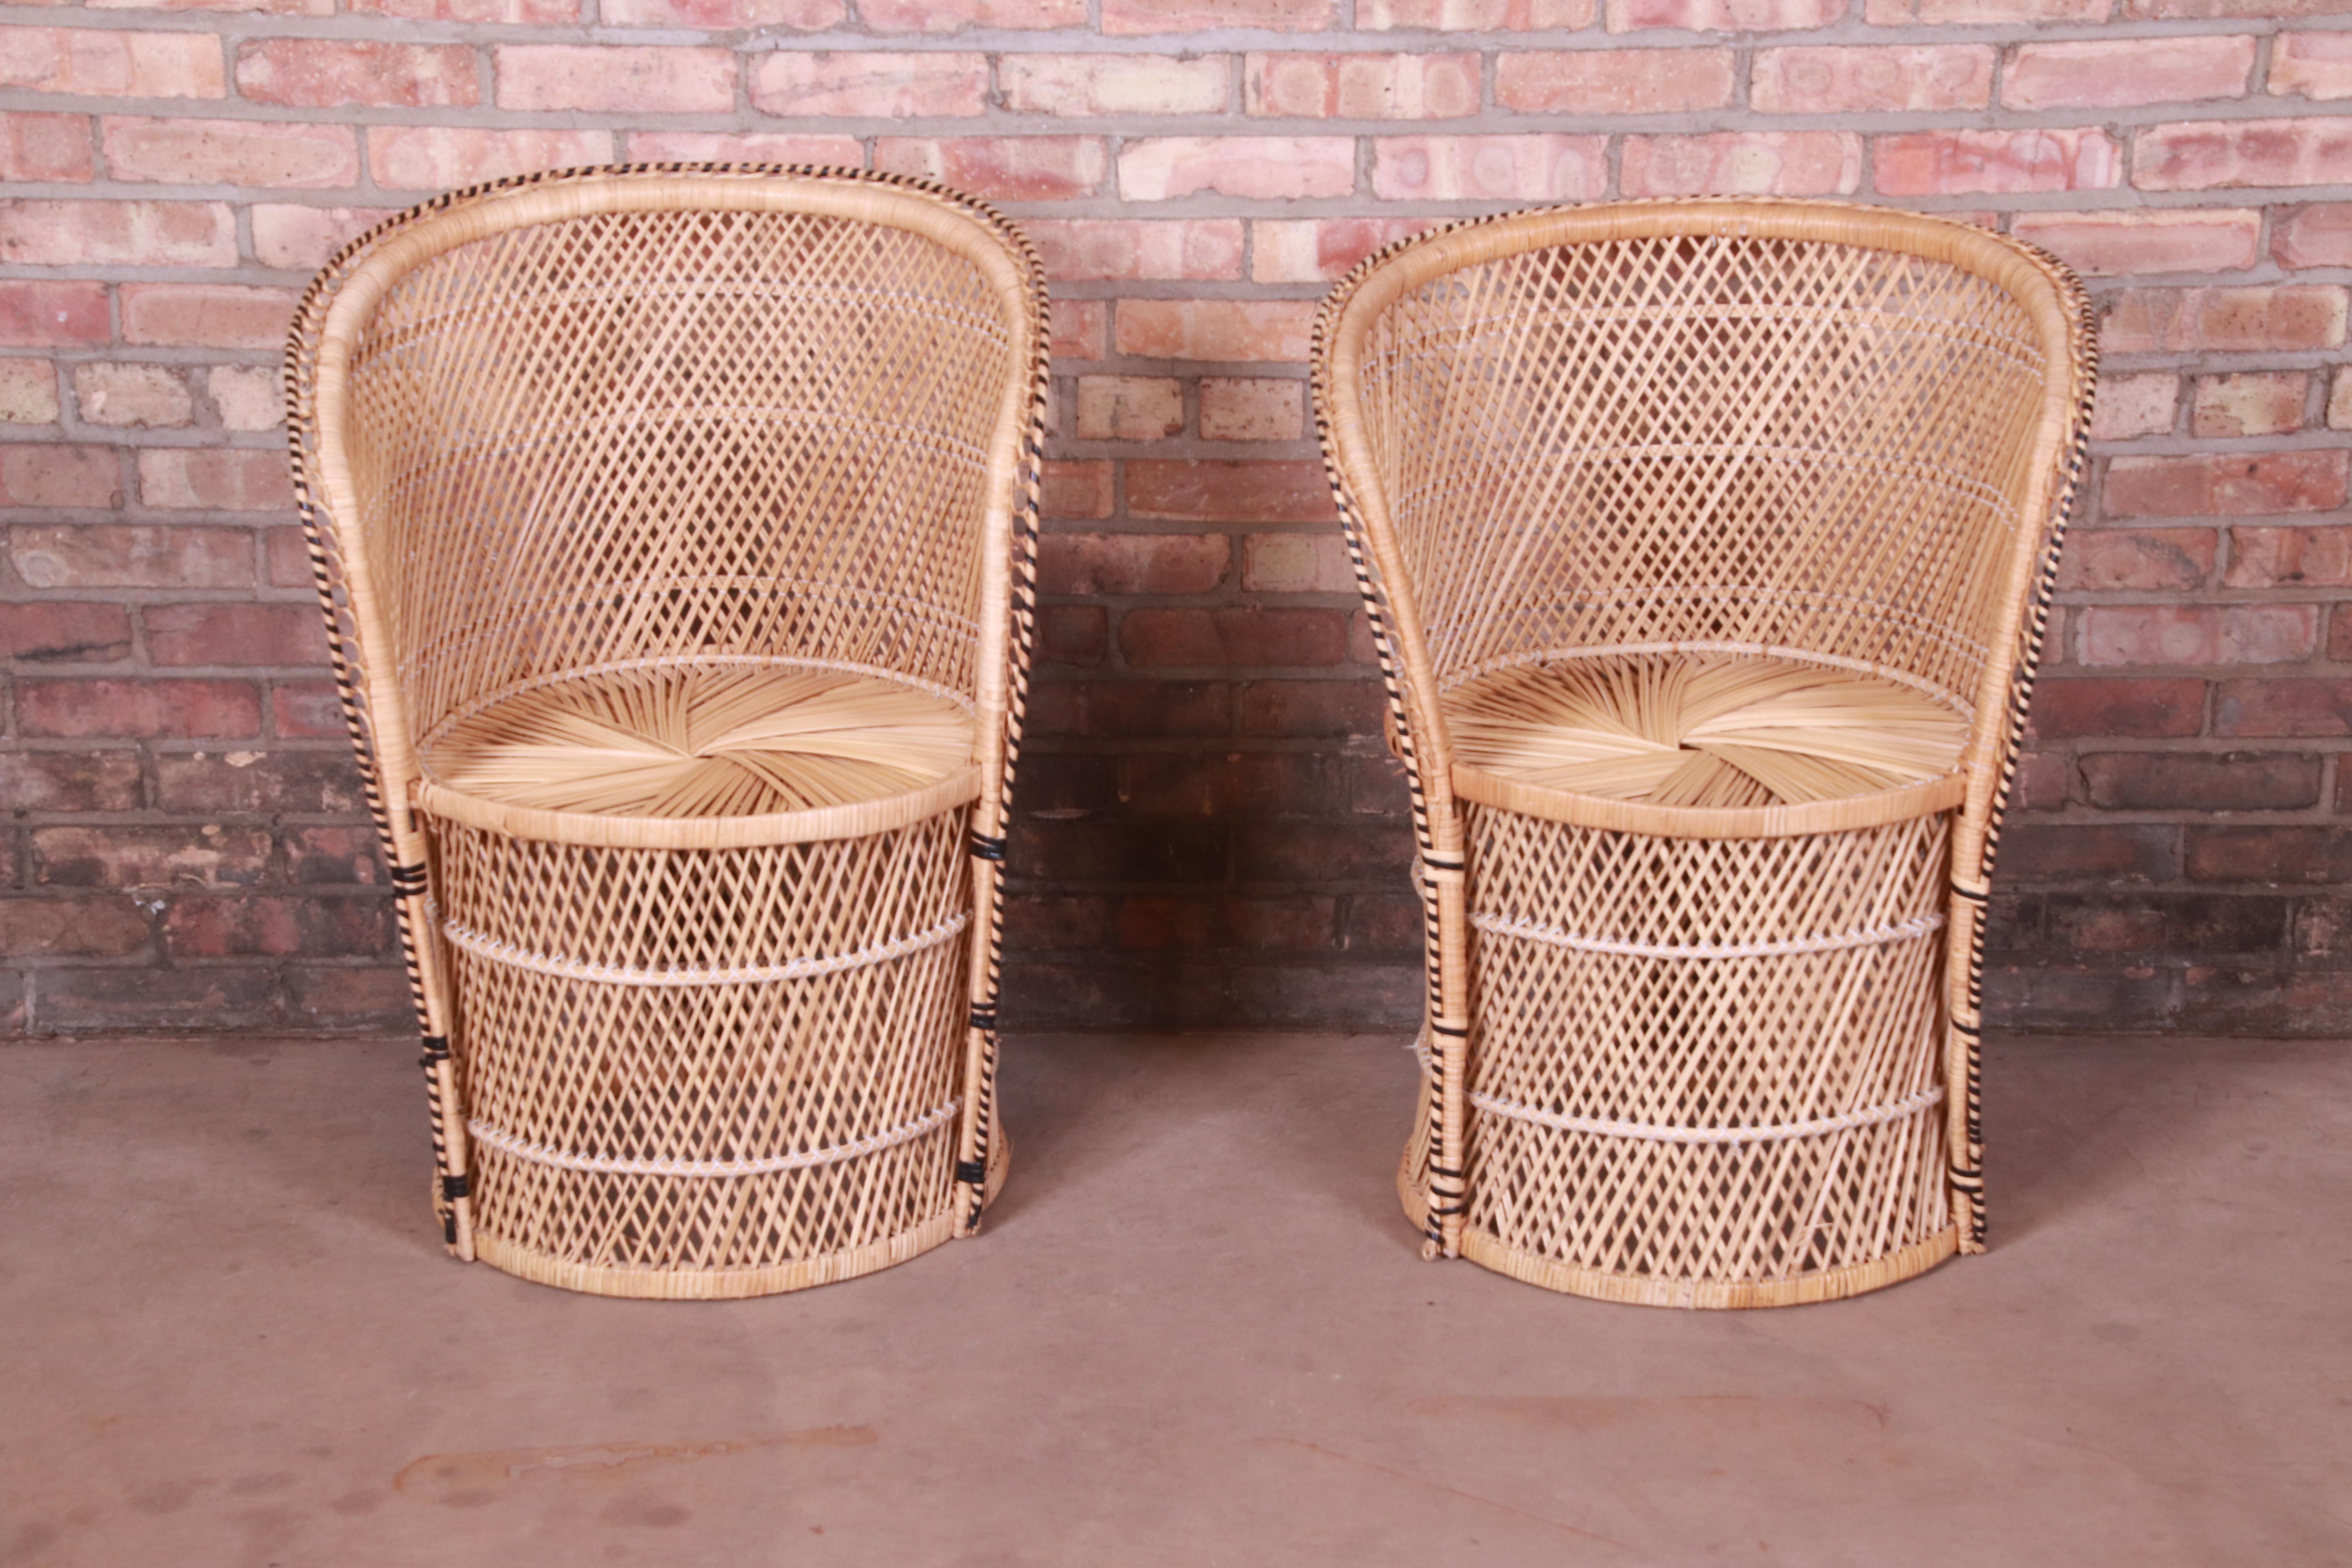 A gorgeous pair of organic modern club chairs,

circa 1970s

Wicker and rattan, with plastic binding.

Measures: 24